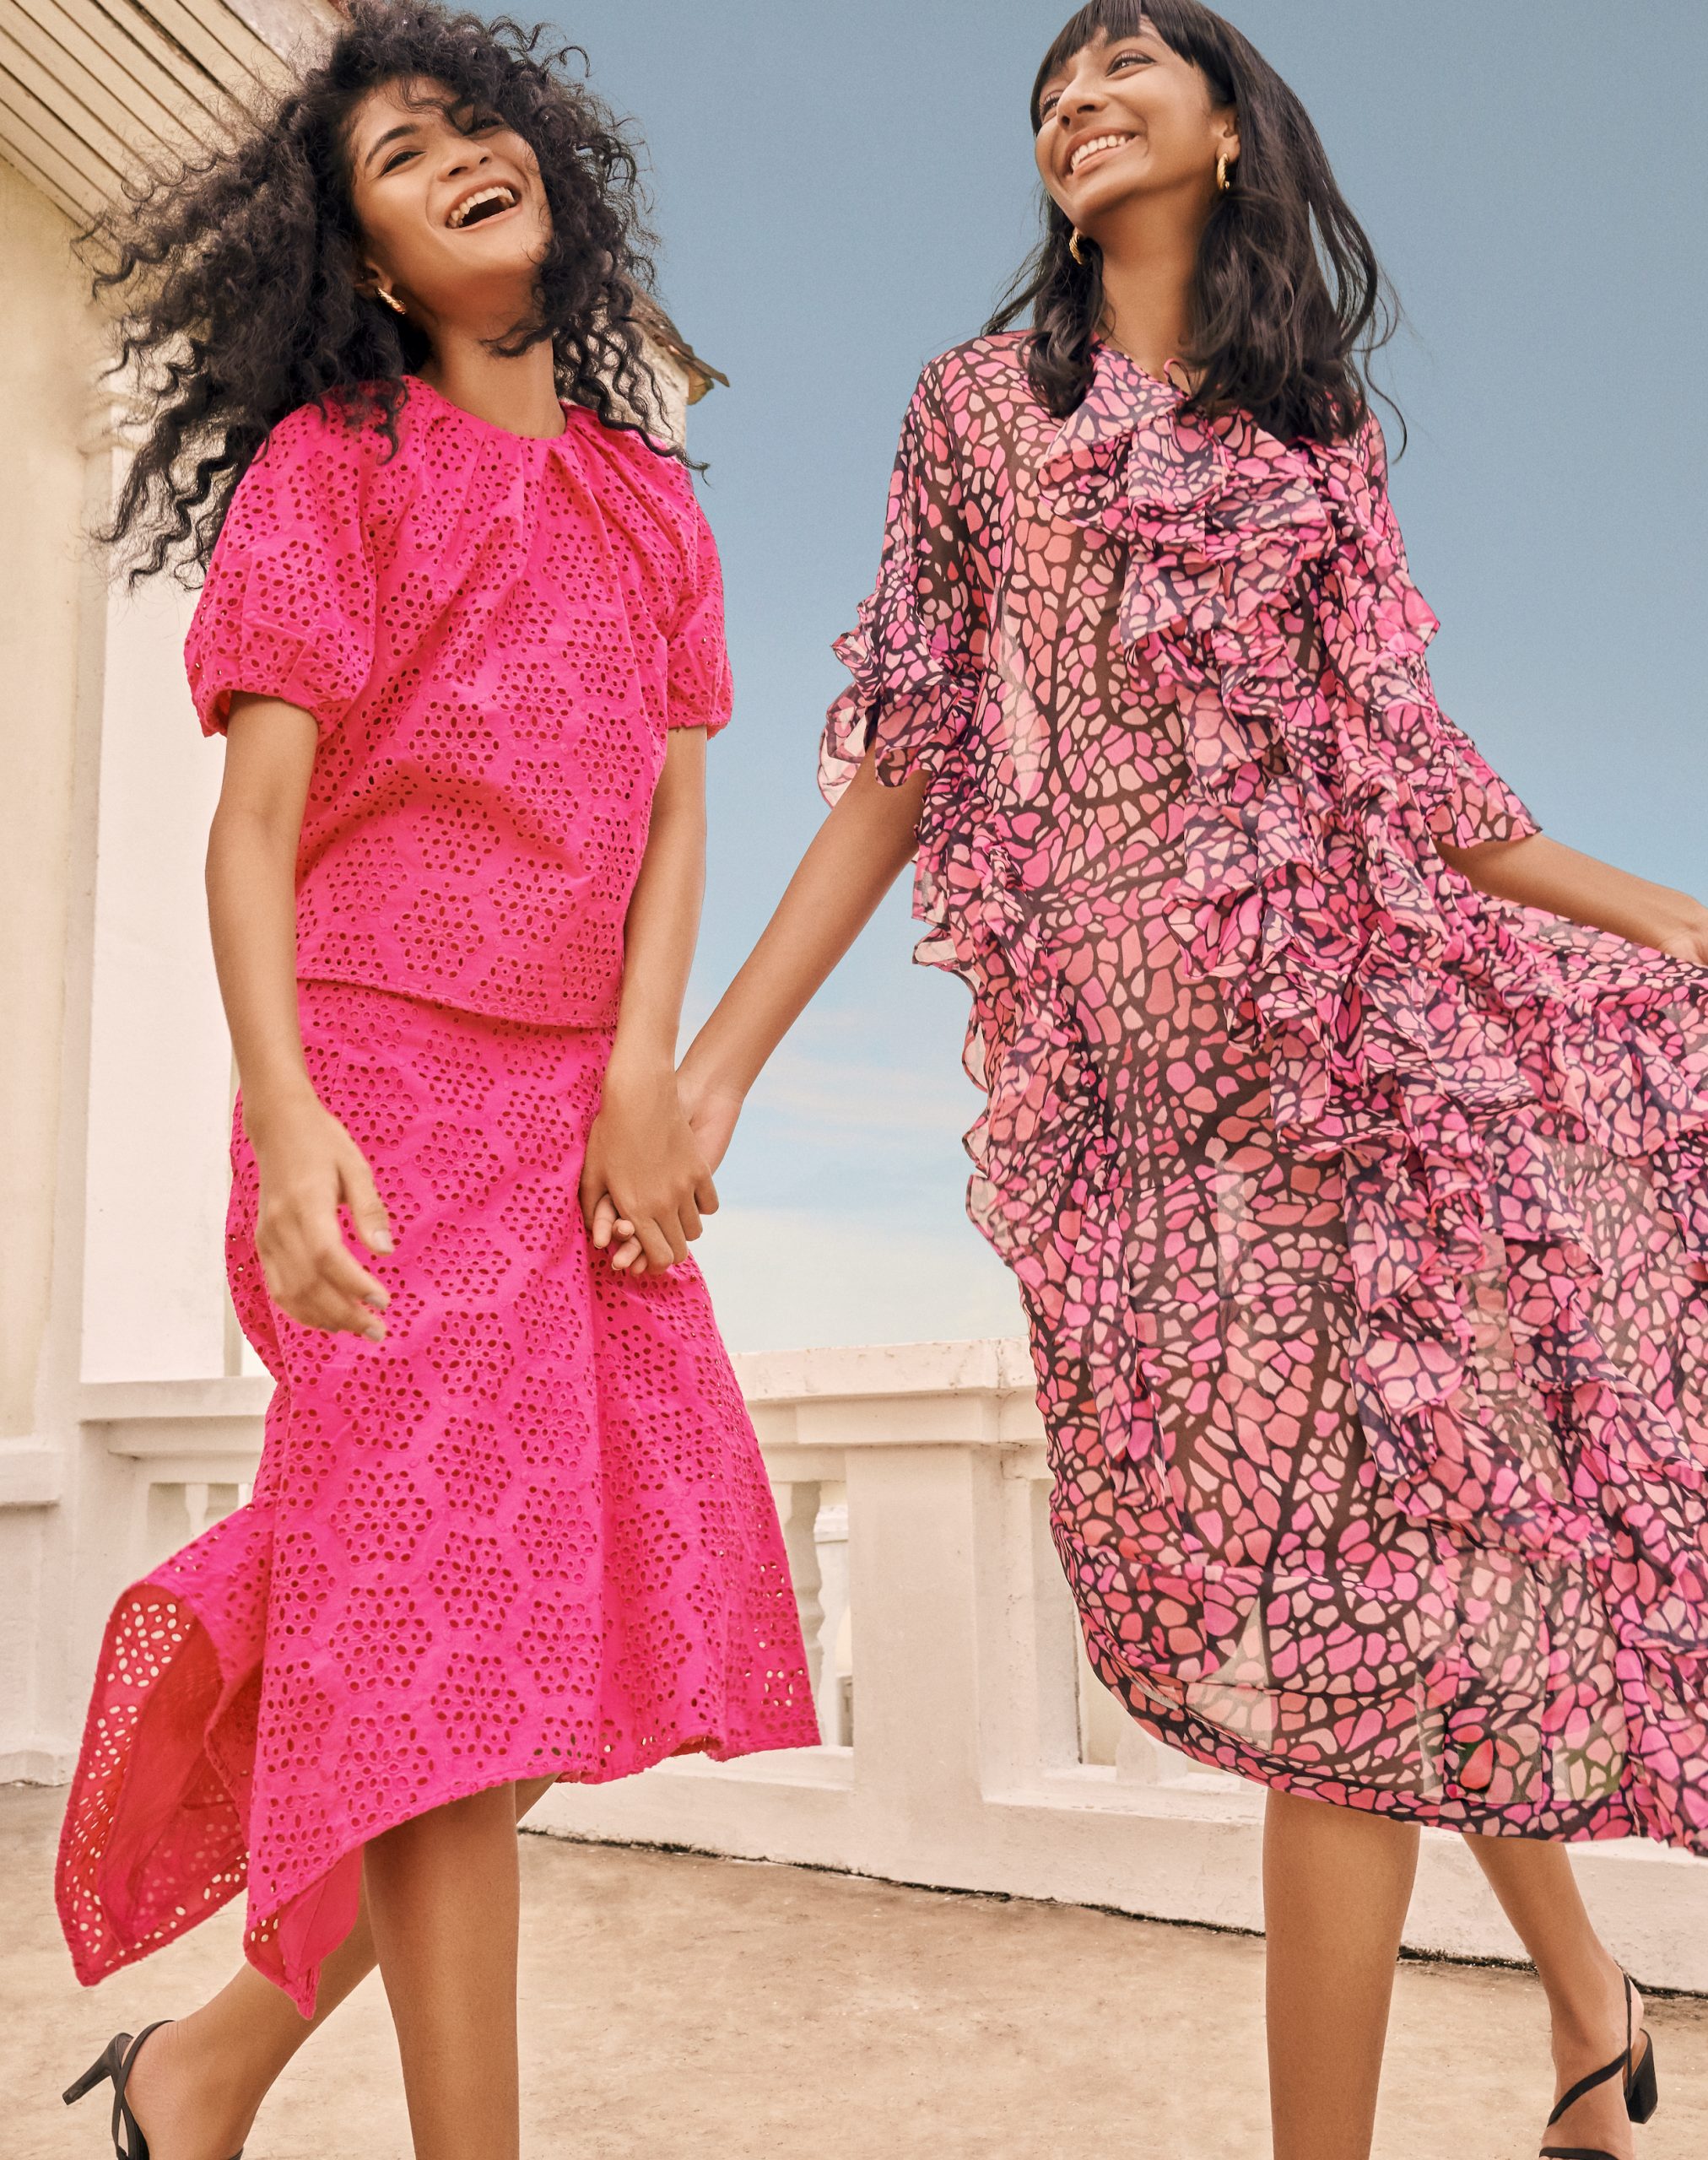 H&M Is Now On Zalora, With An Exclusive Occasion Wear Collection